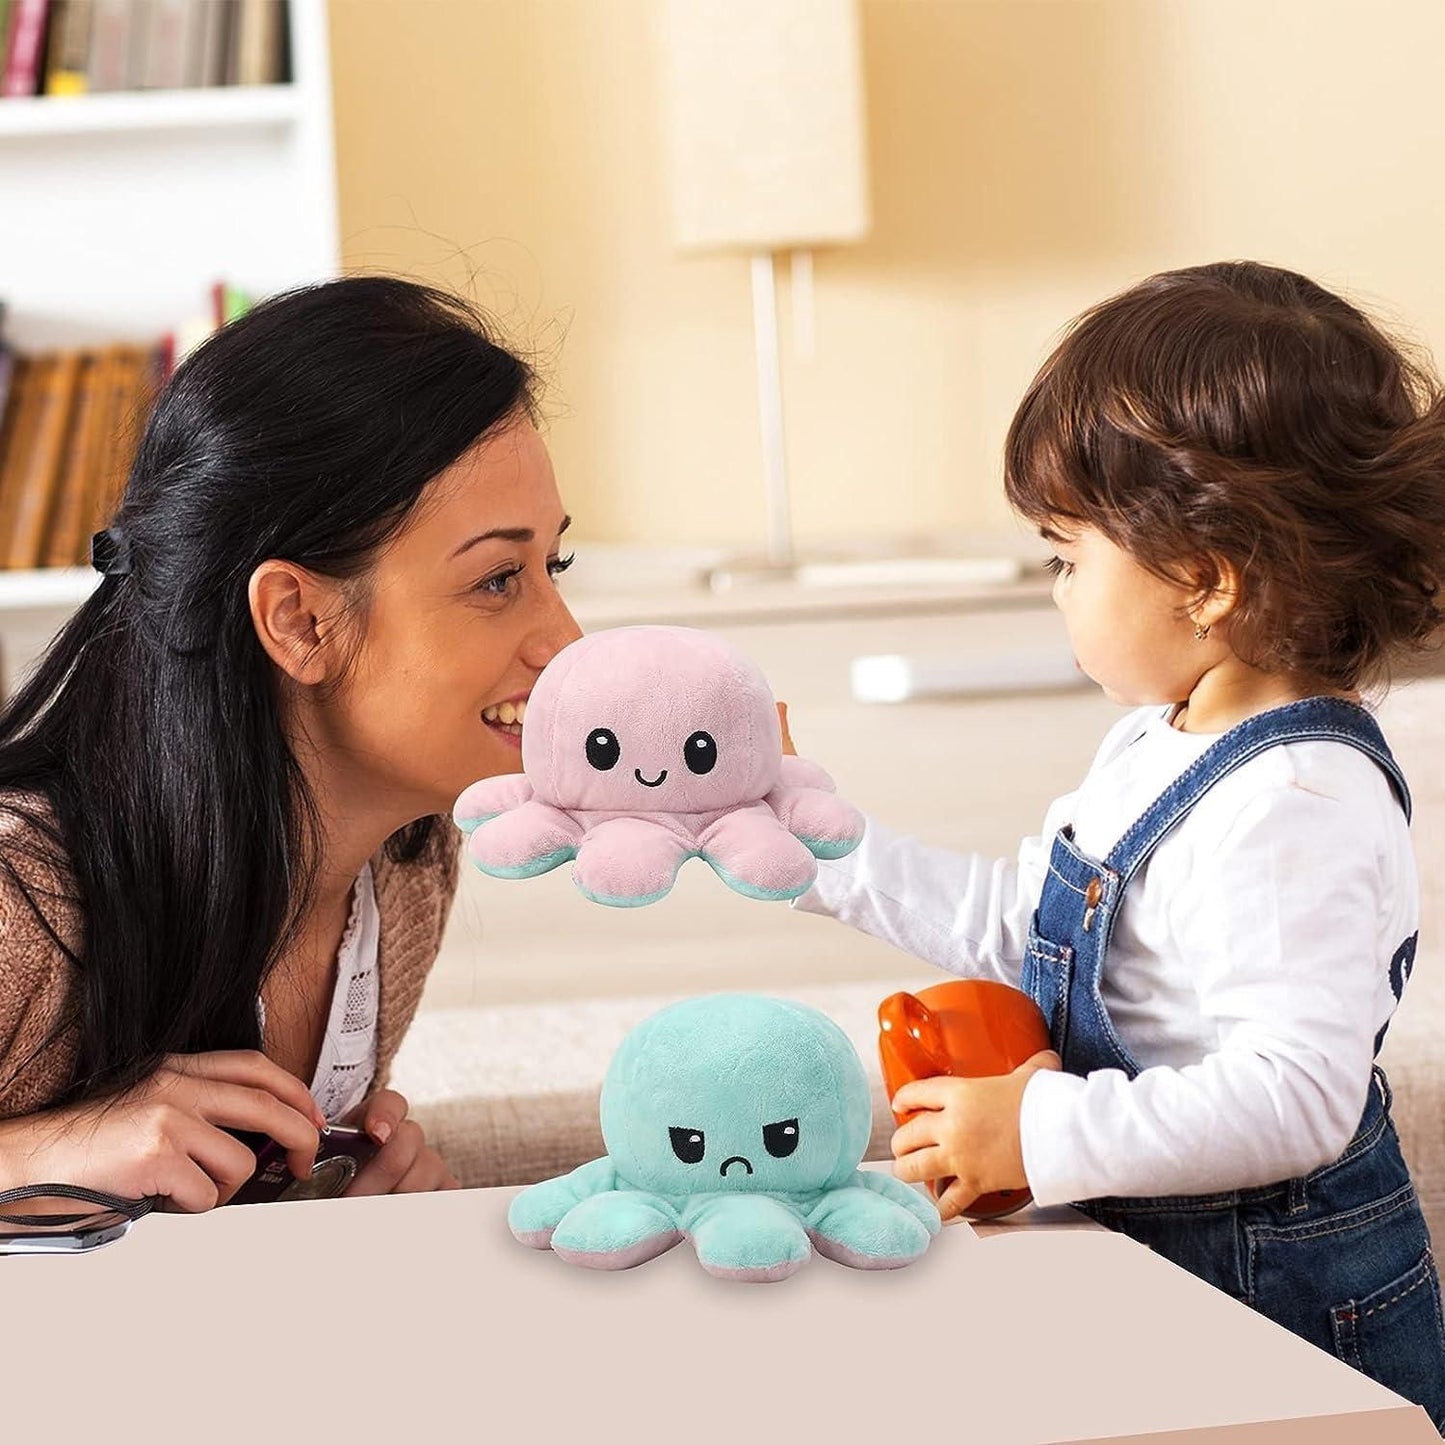 Octopus Soft Stuffed For Kids Infants Toy Baby (Pack of 2)